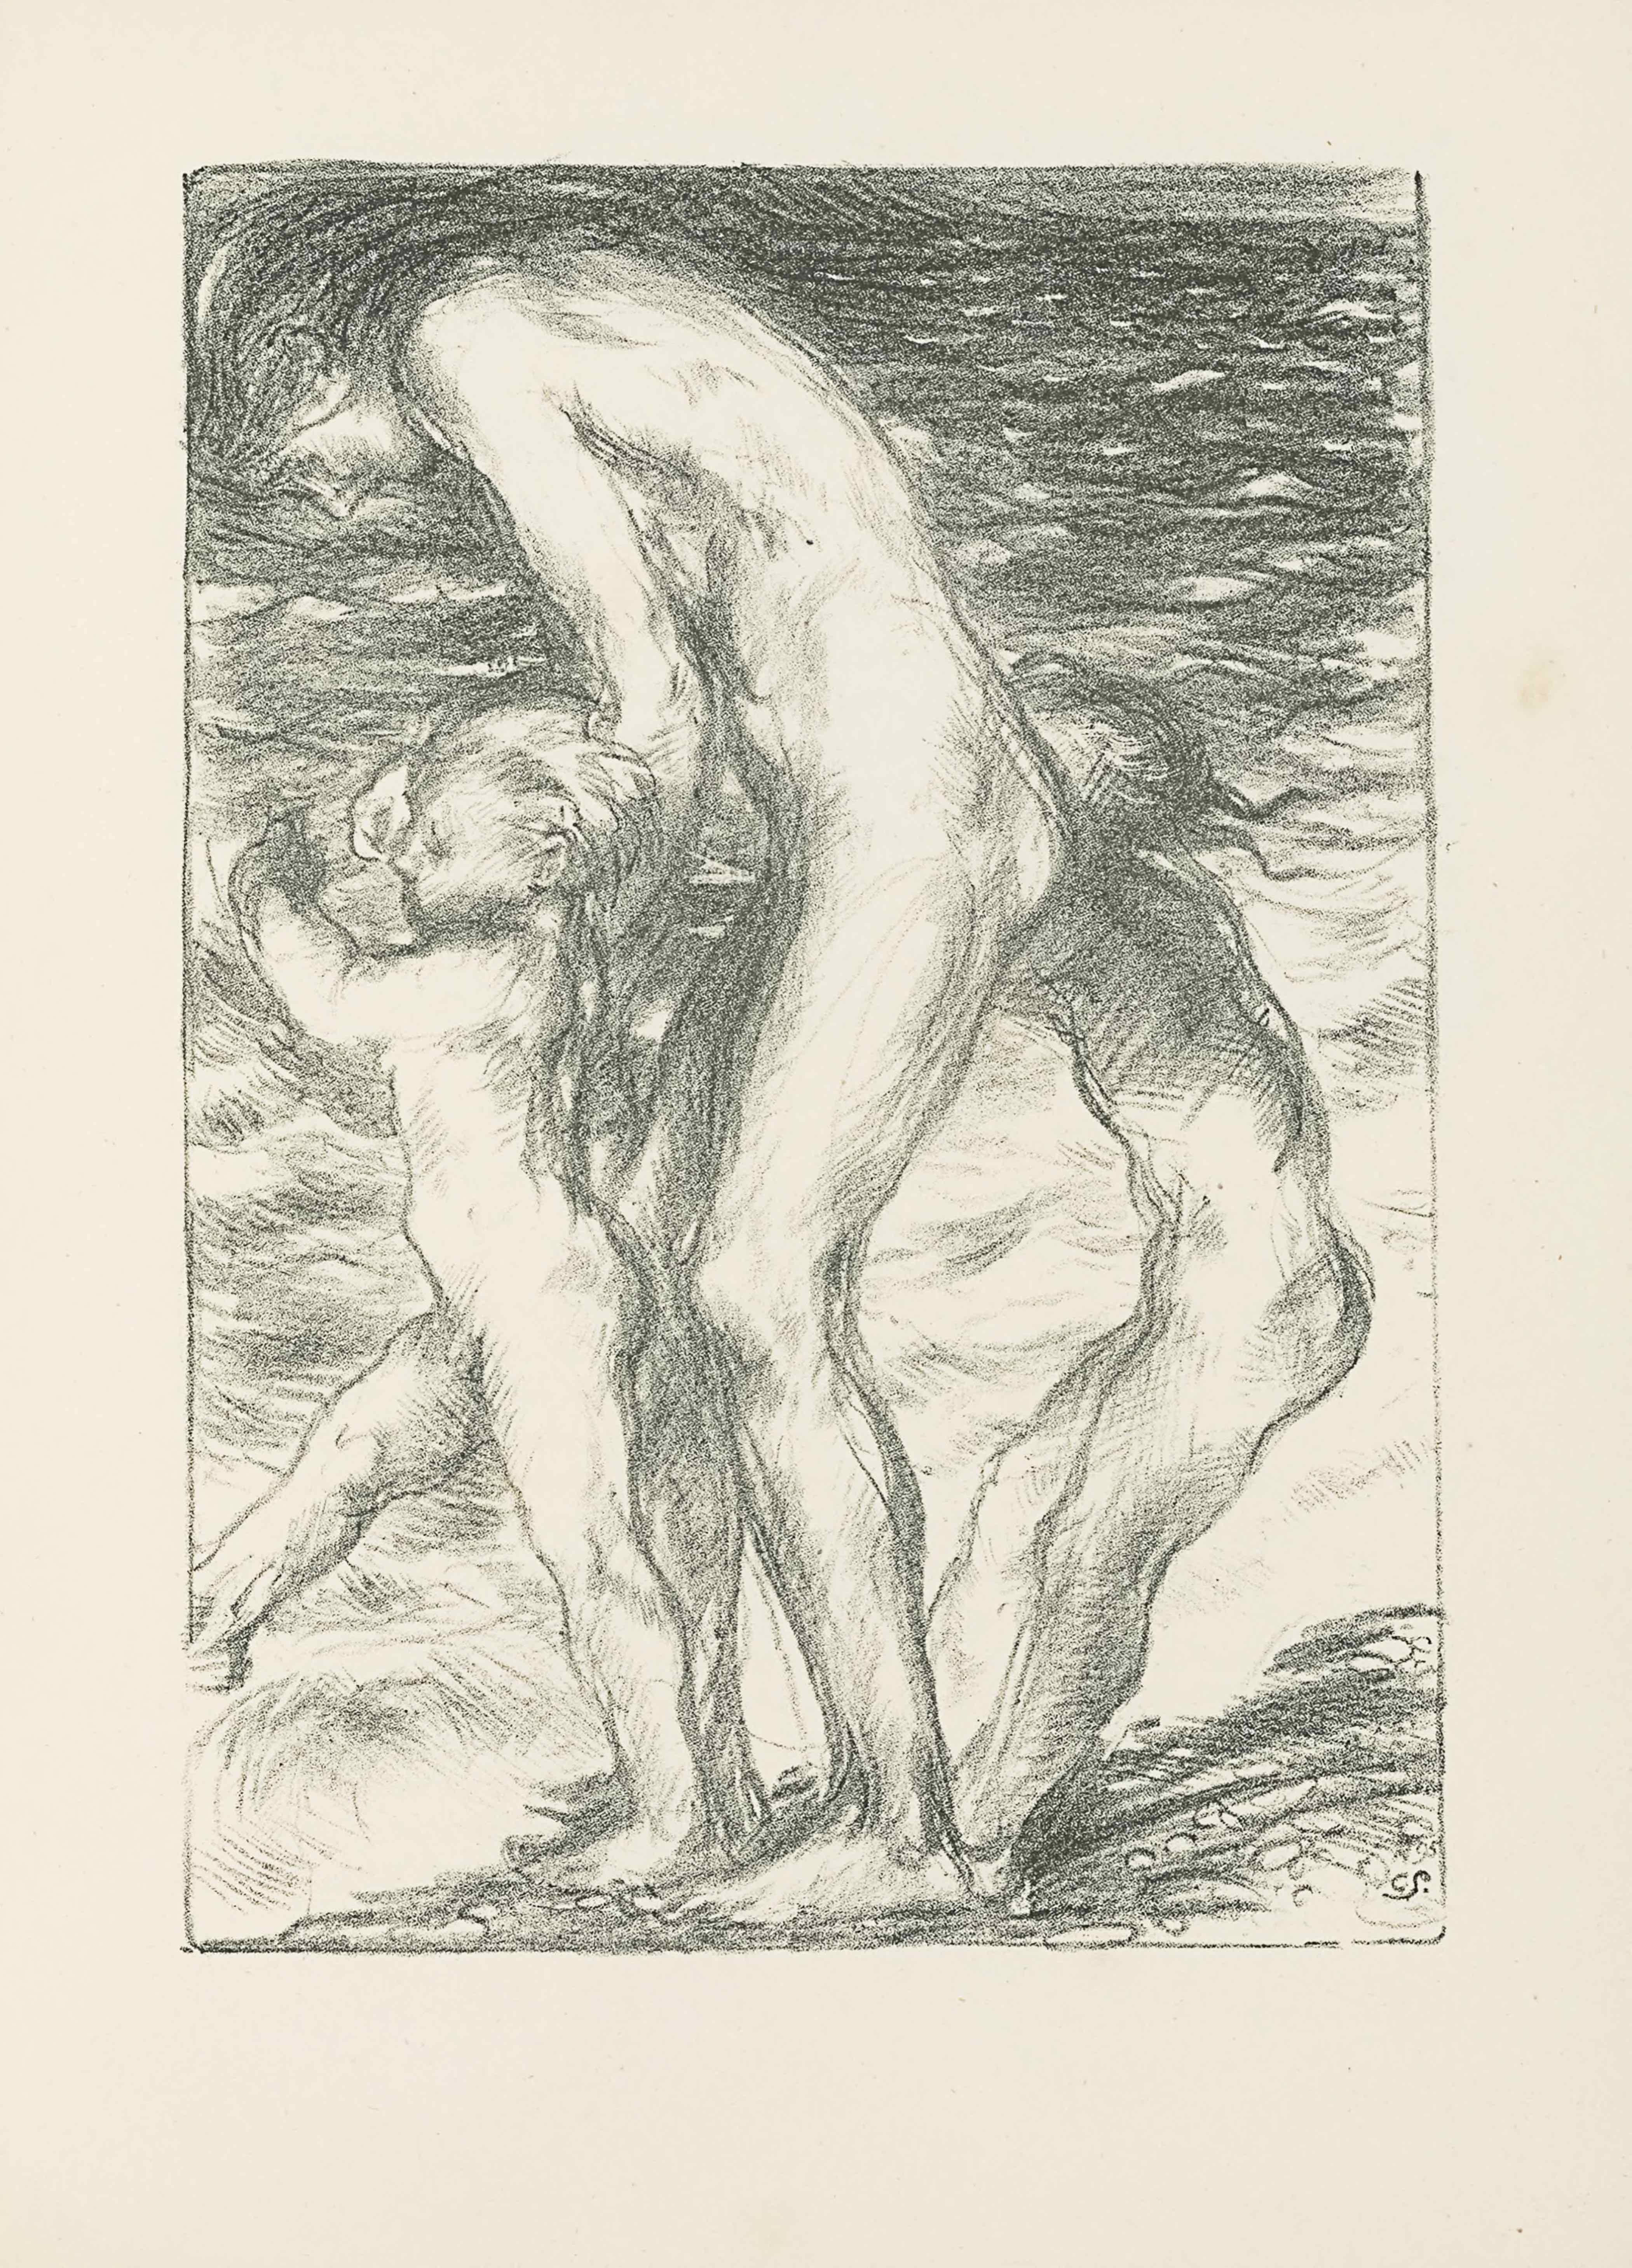 This lithograph is in portrait orientation. The image shows three figures standing naked in profile on the shore of an ocean. The image is bordered by a single line. In the bottom right corner the artist’s initials are lightly scrawled: “CS.” [caps]. The central person in the centre is an adult female, standing at almost double the height of the two child figures in front and behind of her body and on either side of her. The beach that they stand on takes up a very small portion of the page, cutting diagonally up to the right and only taking up about a tenth of the page as a whole. A few small rocks and stones appear in the sand. The white wave caps from the ocean are touching the figures’ toes. The wavy water takes up the entirety of the background, all the way to the top edge of the page with only a slight glimpse of skyline beyond the water in the top right corner. The female figure is drawn hunched forward with her arms extended down and out. Her left arm is holding the boy’s arm in front of her and her right arm is covered by her body but seems to be holding the hand of the child behind and to the right of her. She has a muscular form and long dark hair. Her head is positioned to look straight down at the boy in front of her. The boy in front of her, on the left side of the page, is light-haired and mid-step. His left leg is planted in the sand while his right is extended straight out and forward His left arm is swinging up and bent at the elbow. His right arm is out of view and he looks to be holding hands with the woman. The child behind the woman and to the right is visible only by their body and the back of their head: their face is covered by the woman’s body. The child is holding onto the woman’s right arm and leaning backwards, bent at the waist with feet planted in front of them. Long hair falls down the child’s back to the waist. The hair seems to be wet.